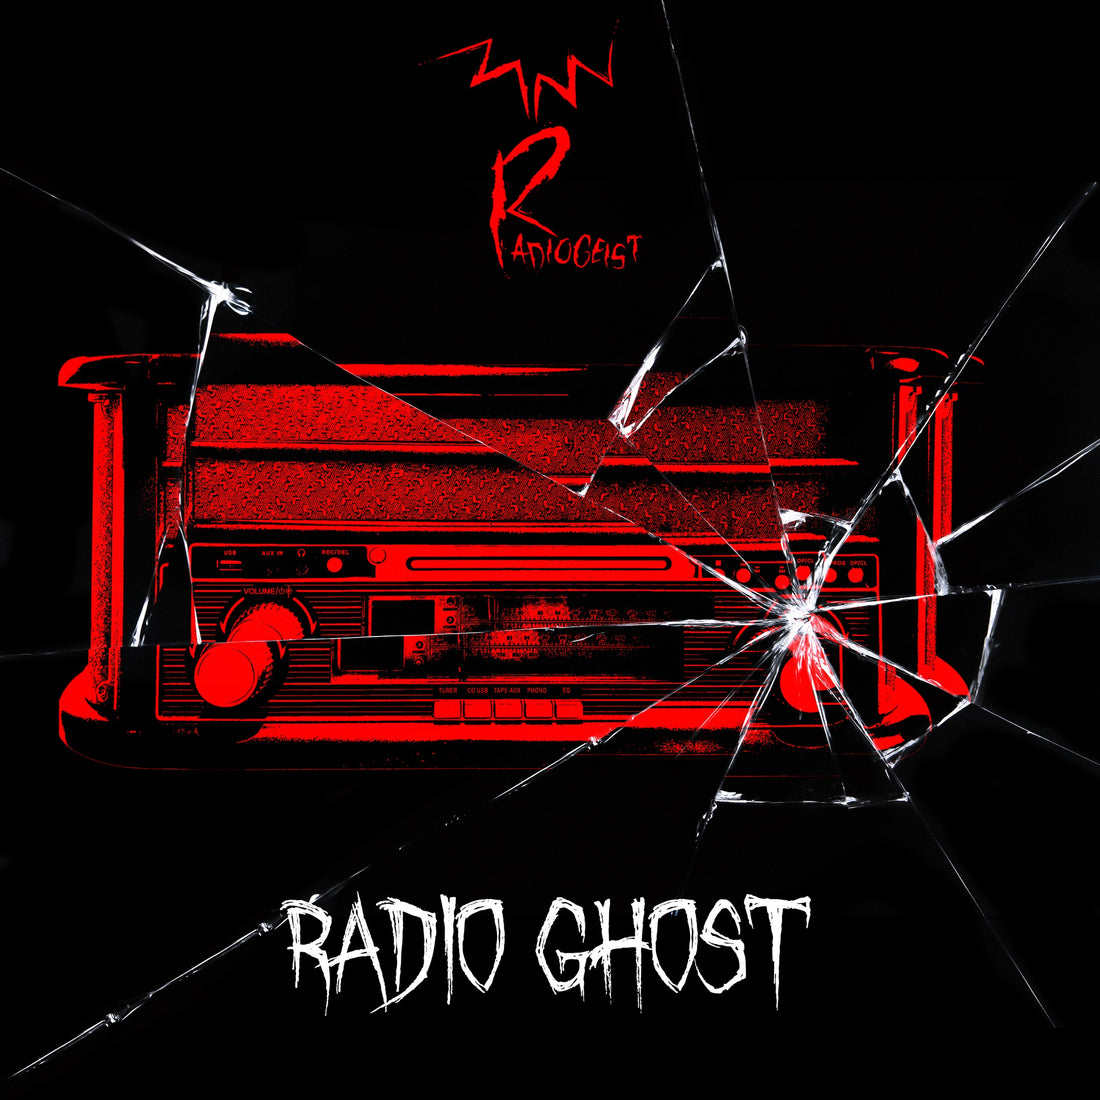 New EP from Radiogeist incoming!